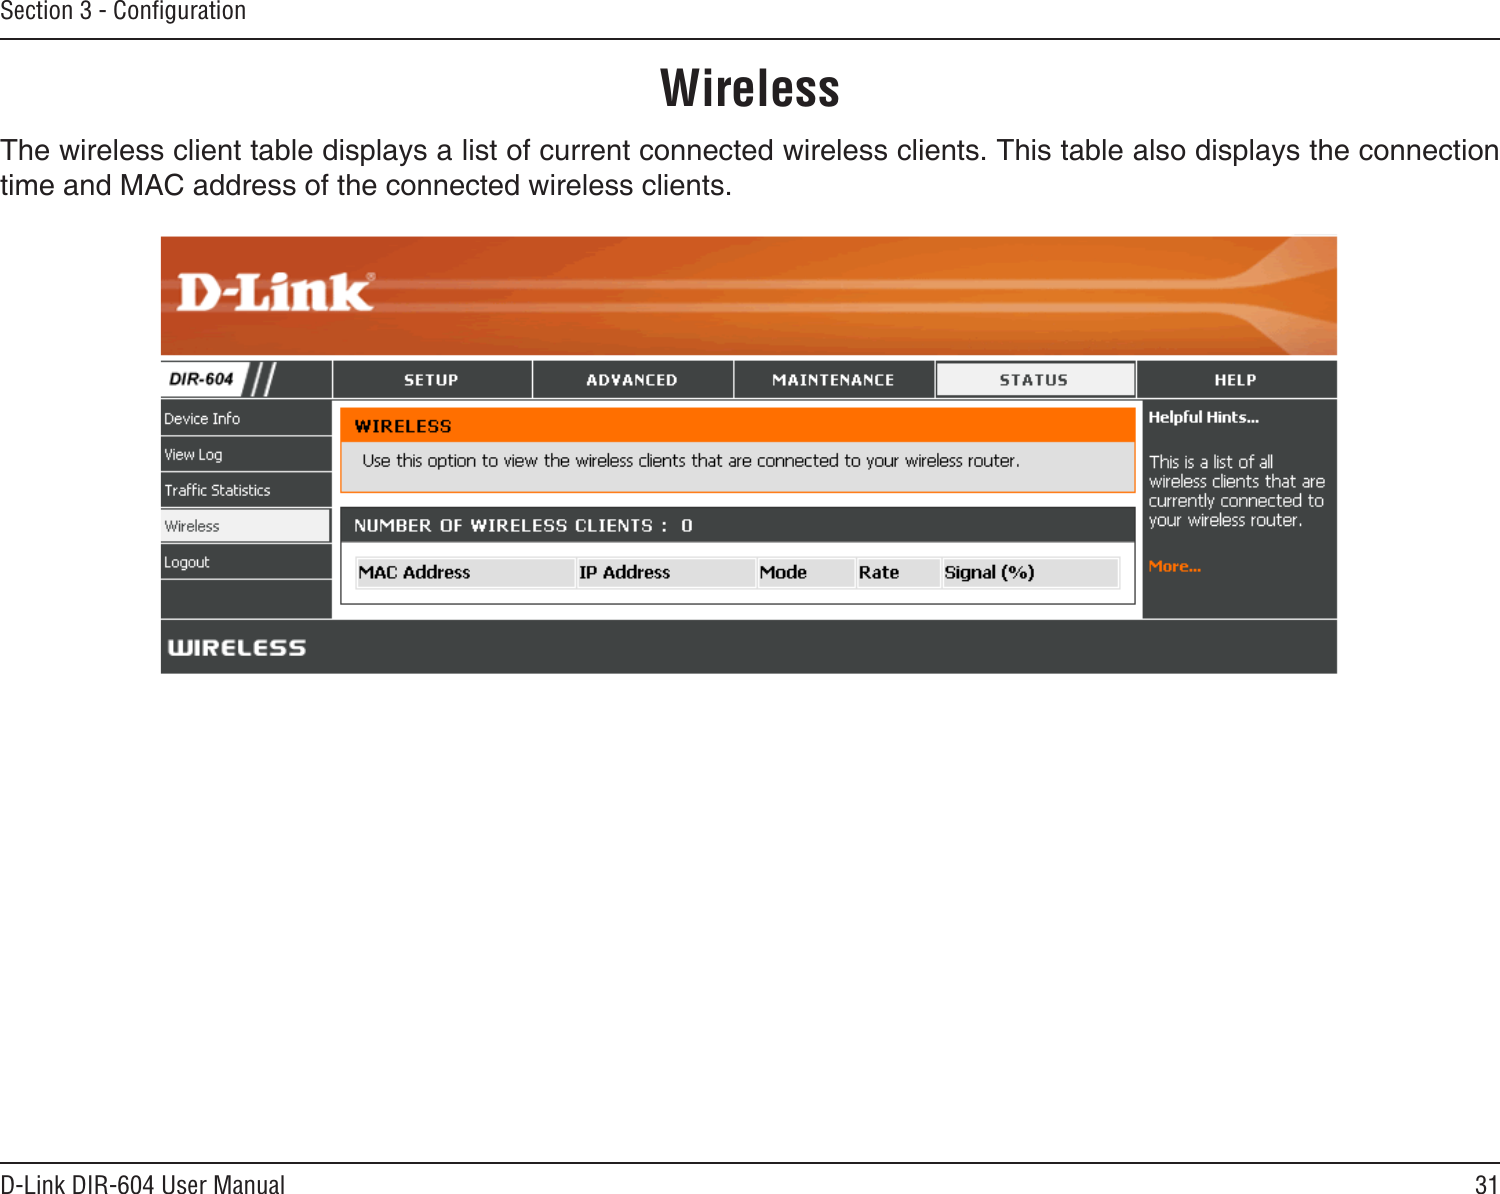 31D-Link DIR-604 User ManualSection 3 - ConﬁgurationWirelessThe wireless client table displays a list of current connected wireless clients. This table also displays the connection time and MAC address of the connected wireless clients.